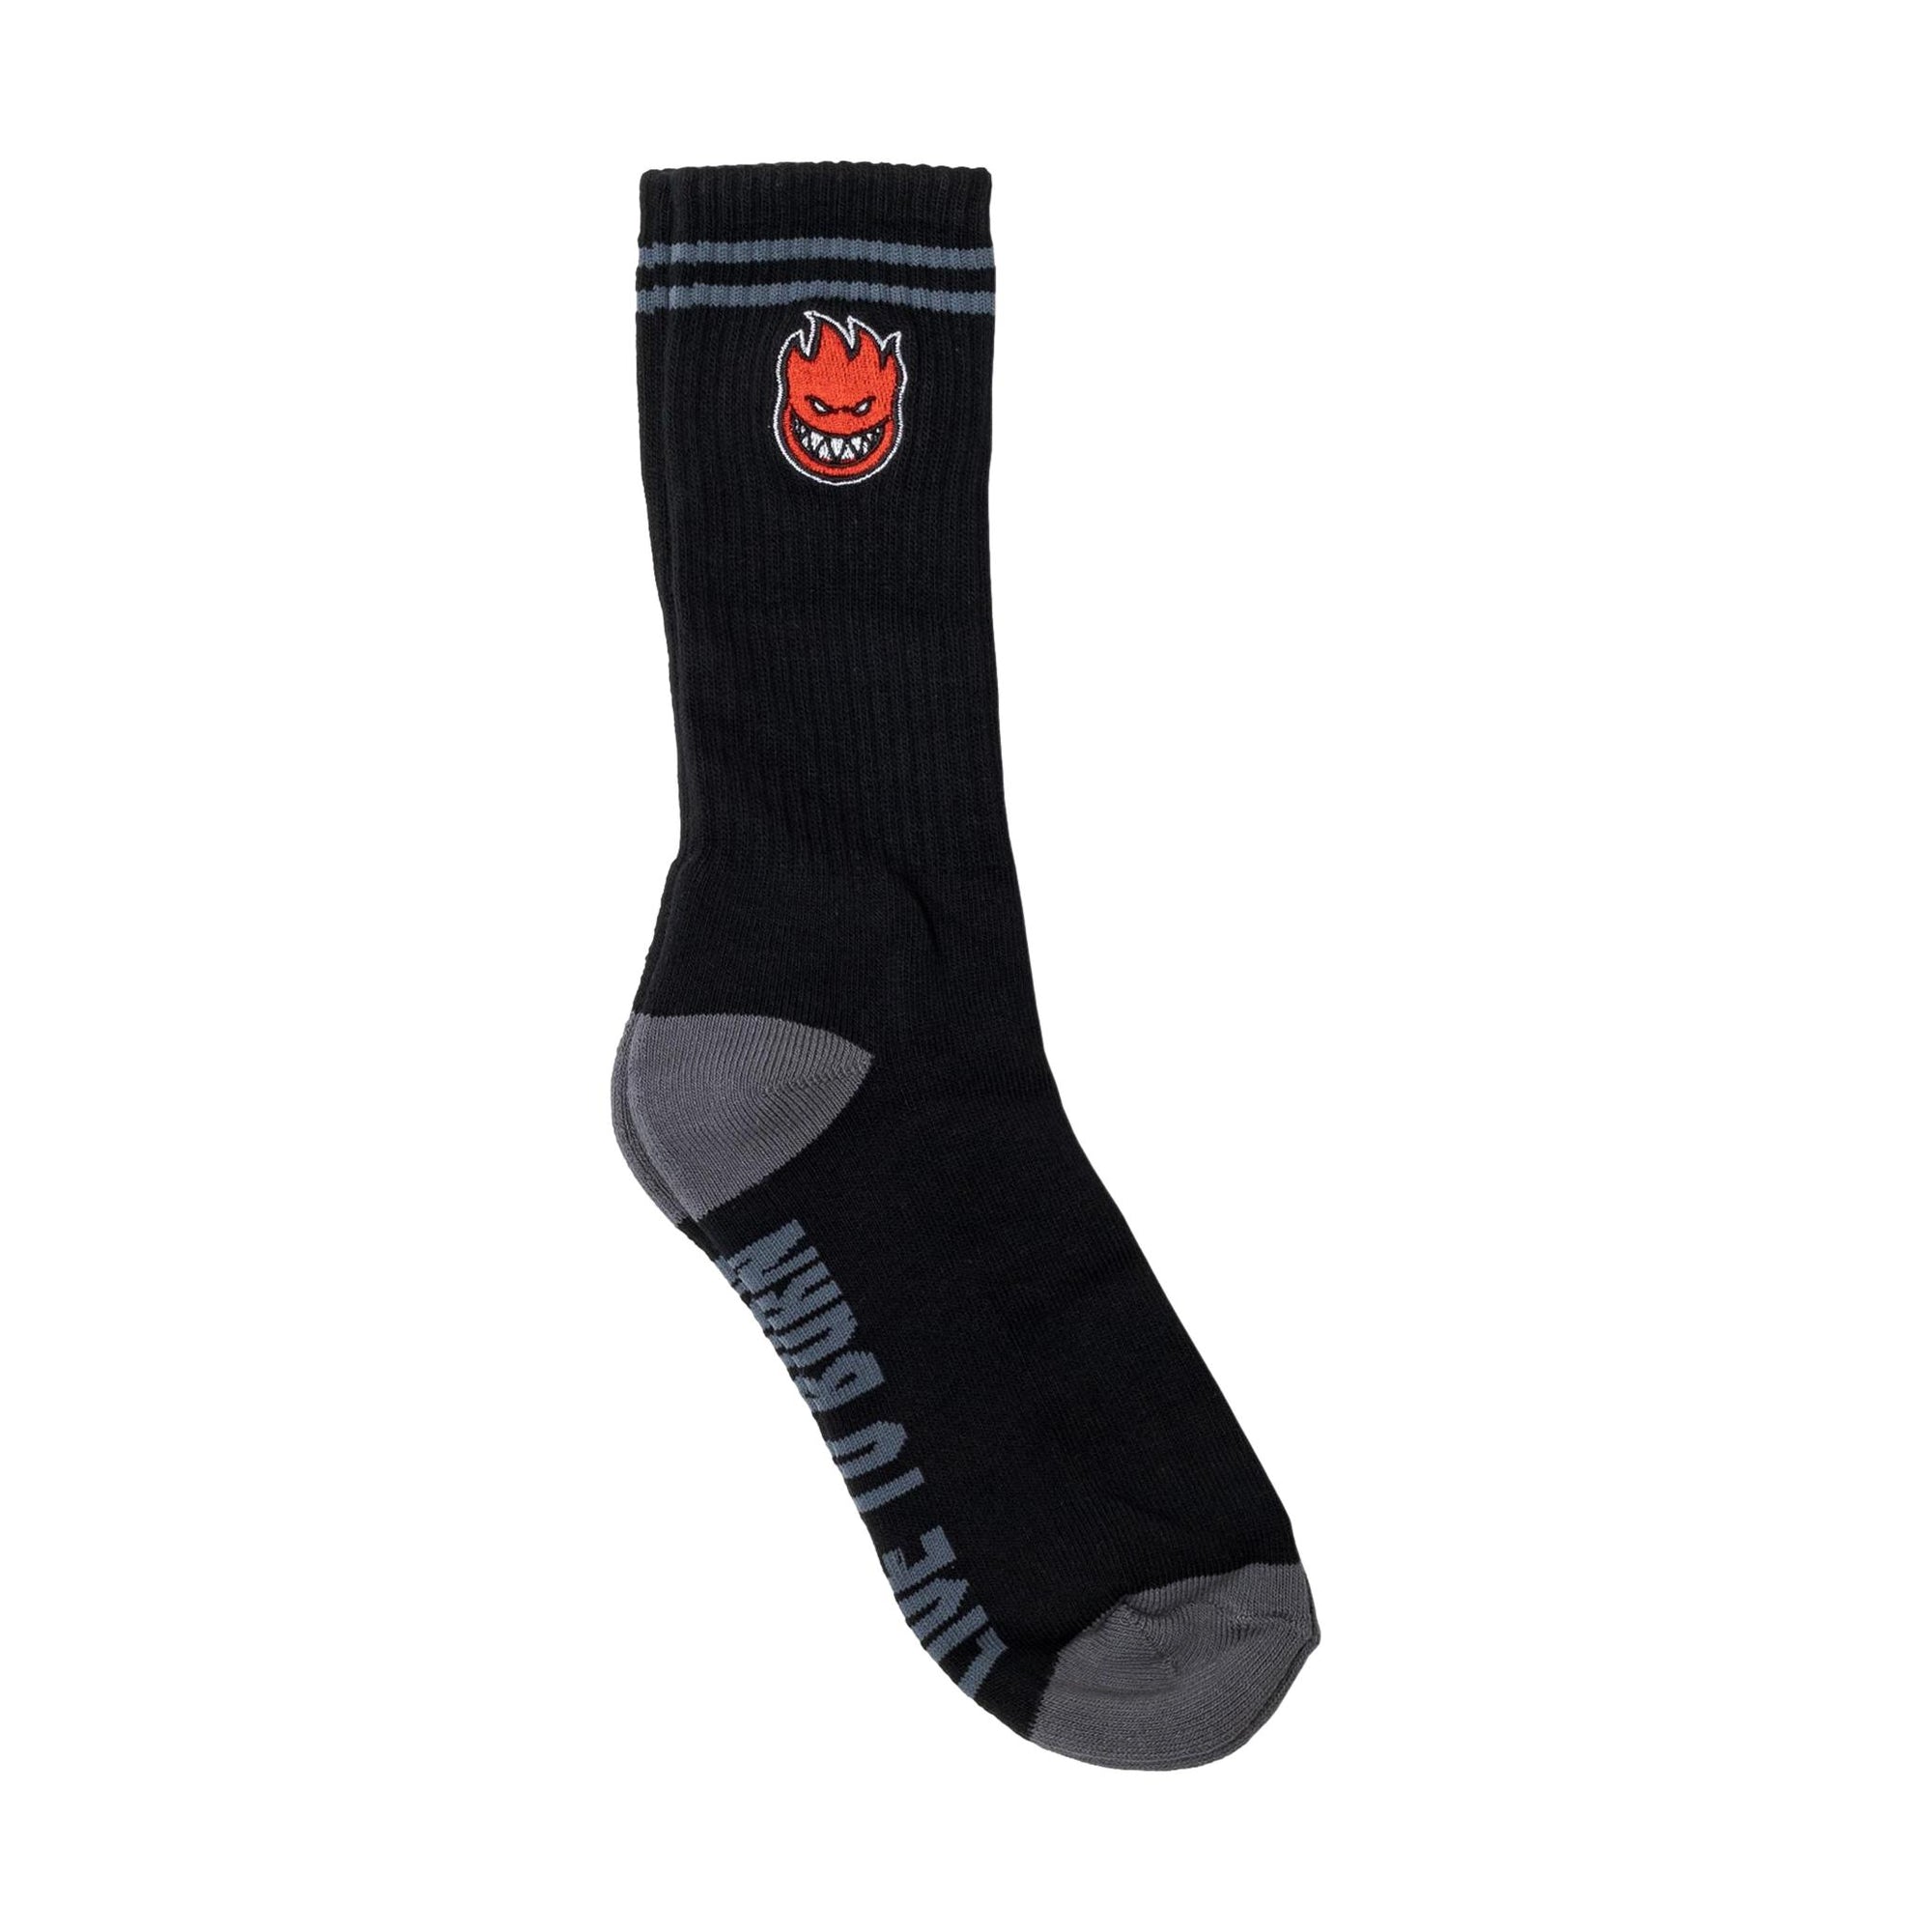 Spitfire Bighead Fill Embroidered Socks Black/Charcoal/Red